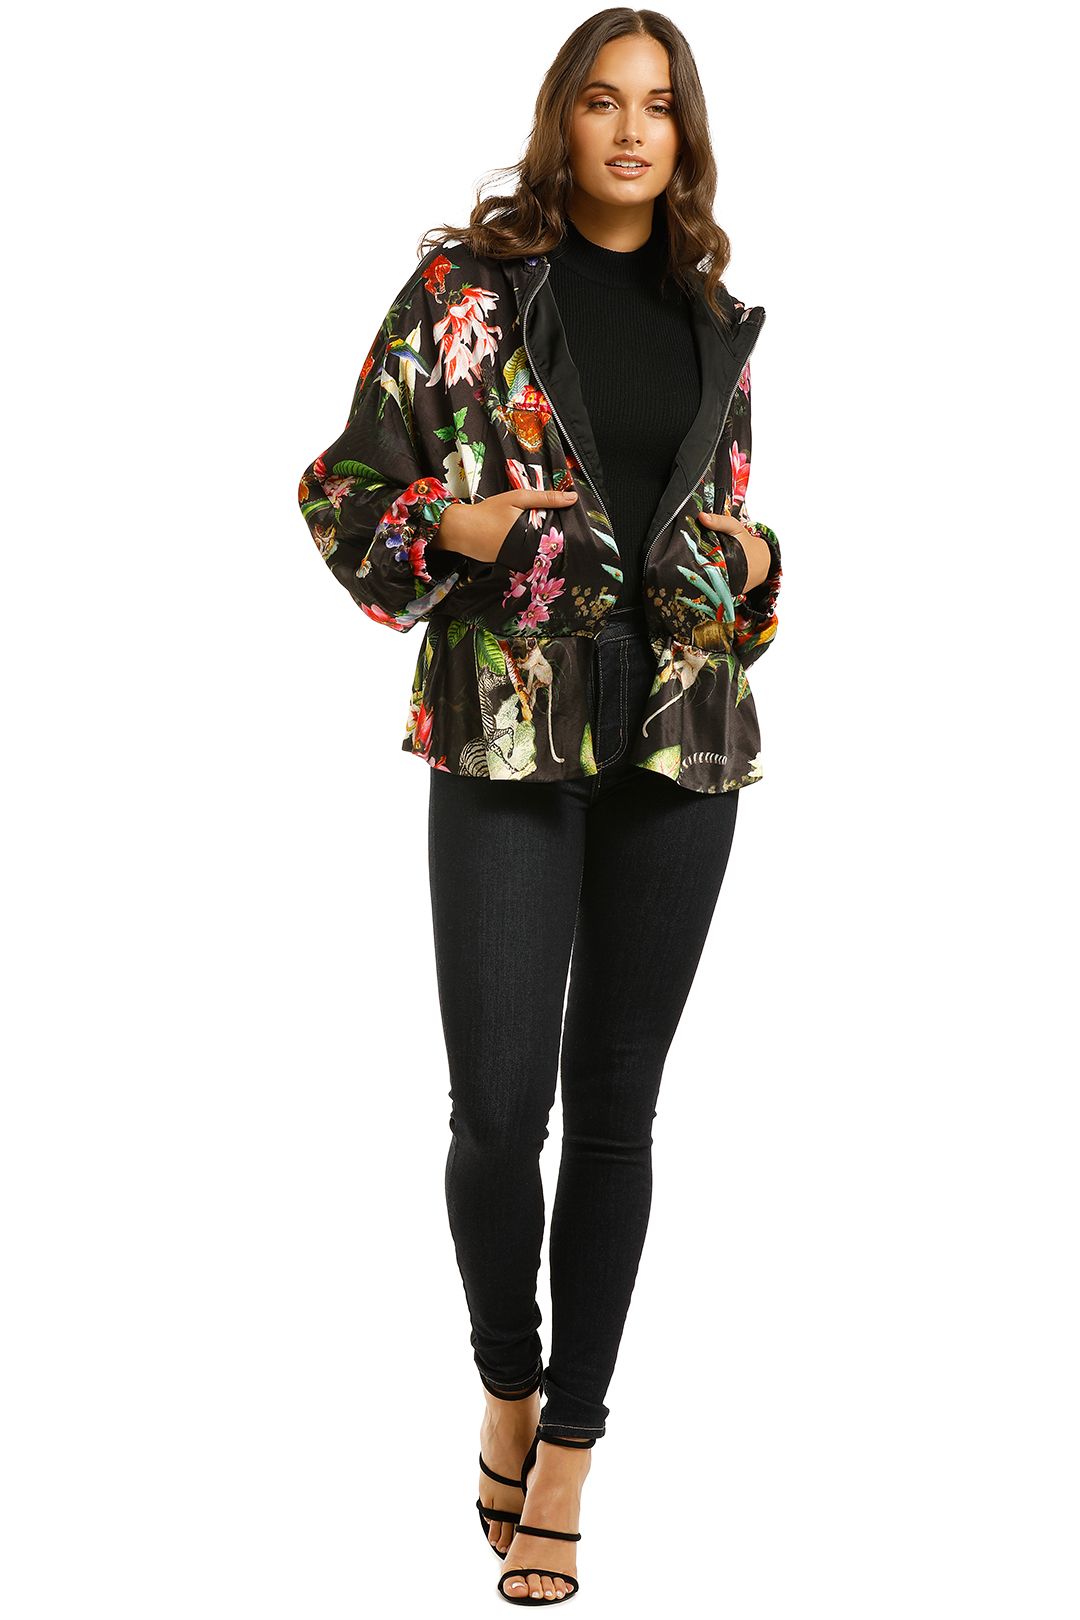 Cooper-By-Trelise-Cooper-Take-Cover Bomber-Black-Multi-Front